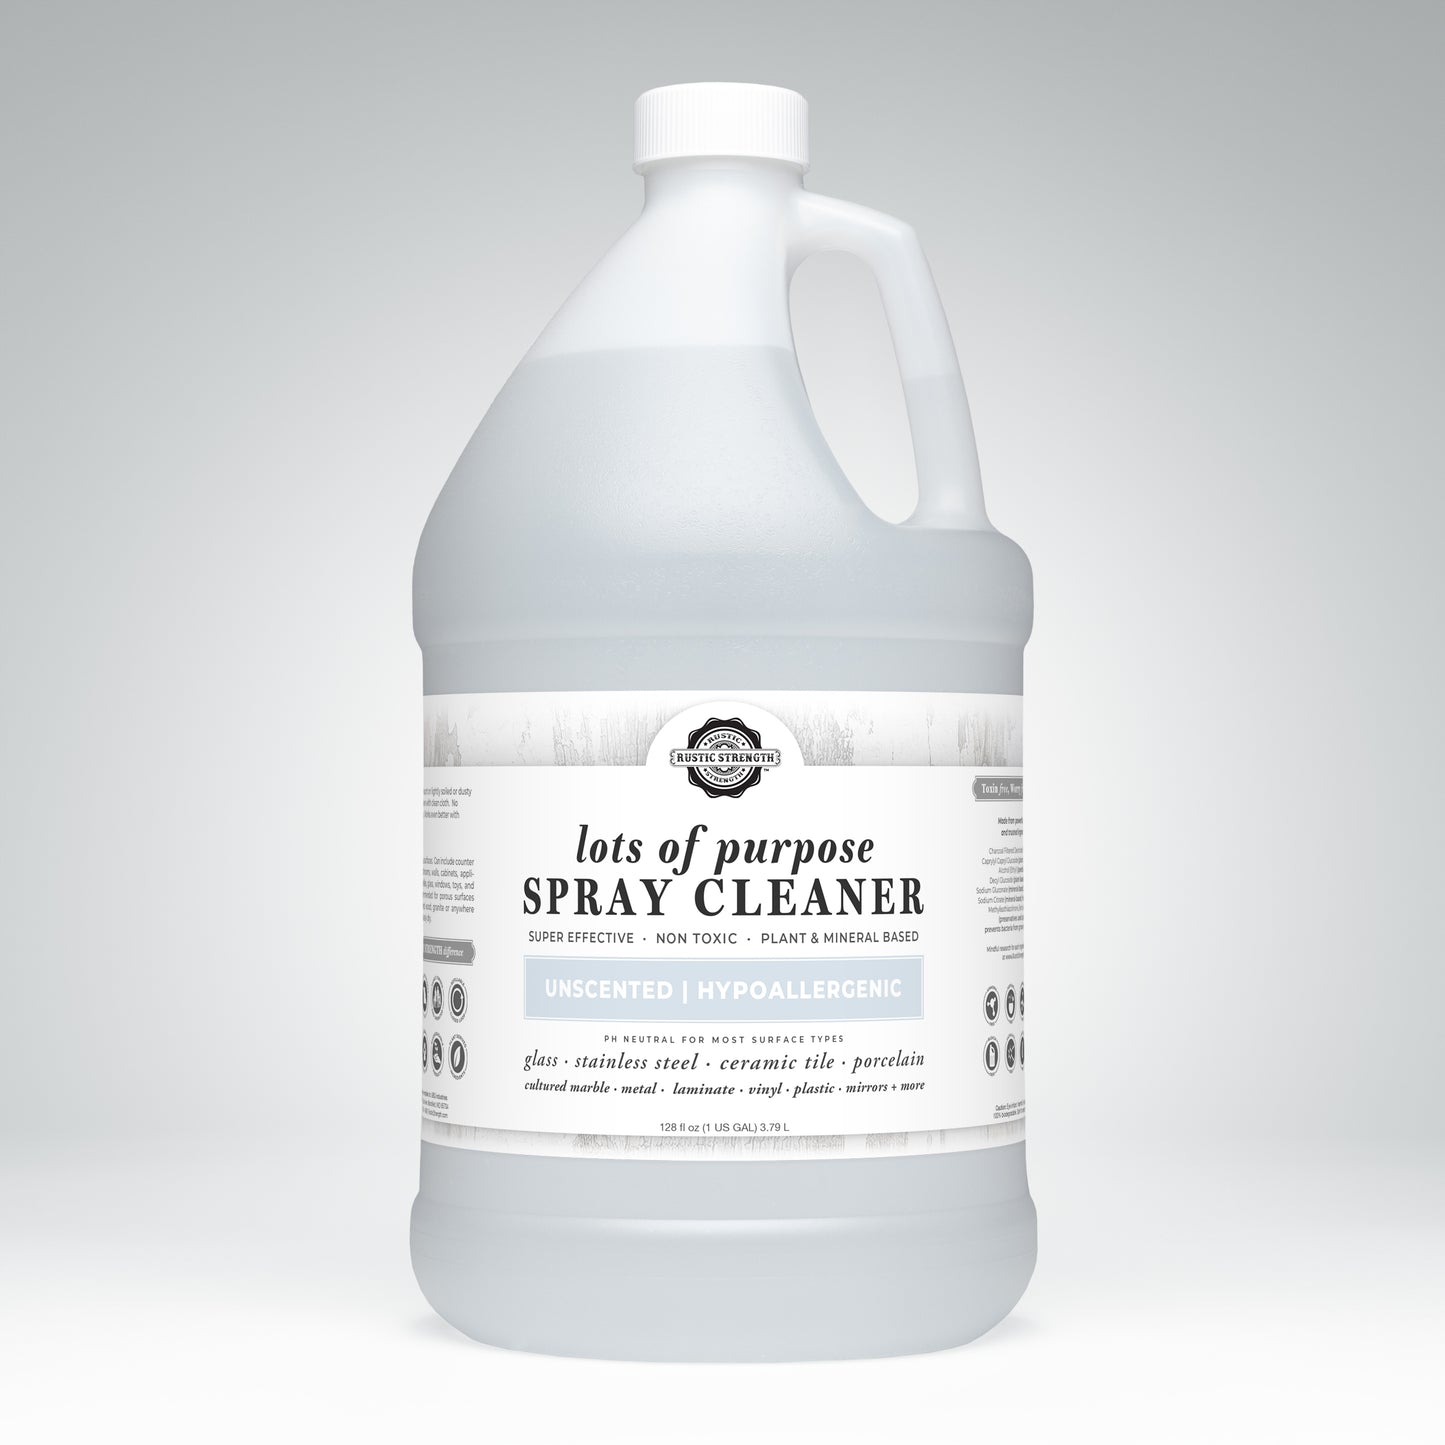 Lots of Purpose Spray Cleaner